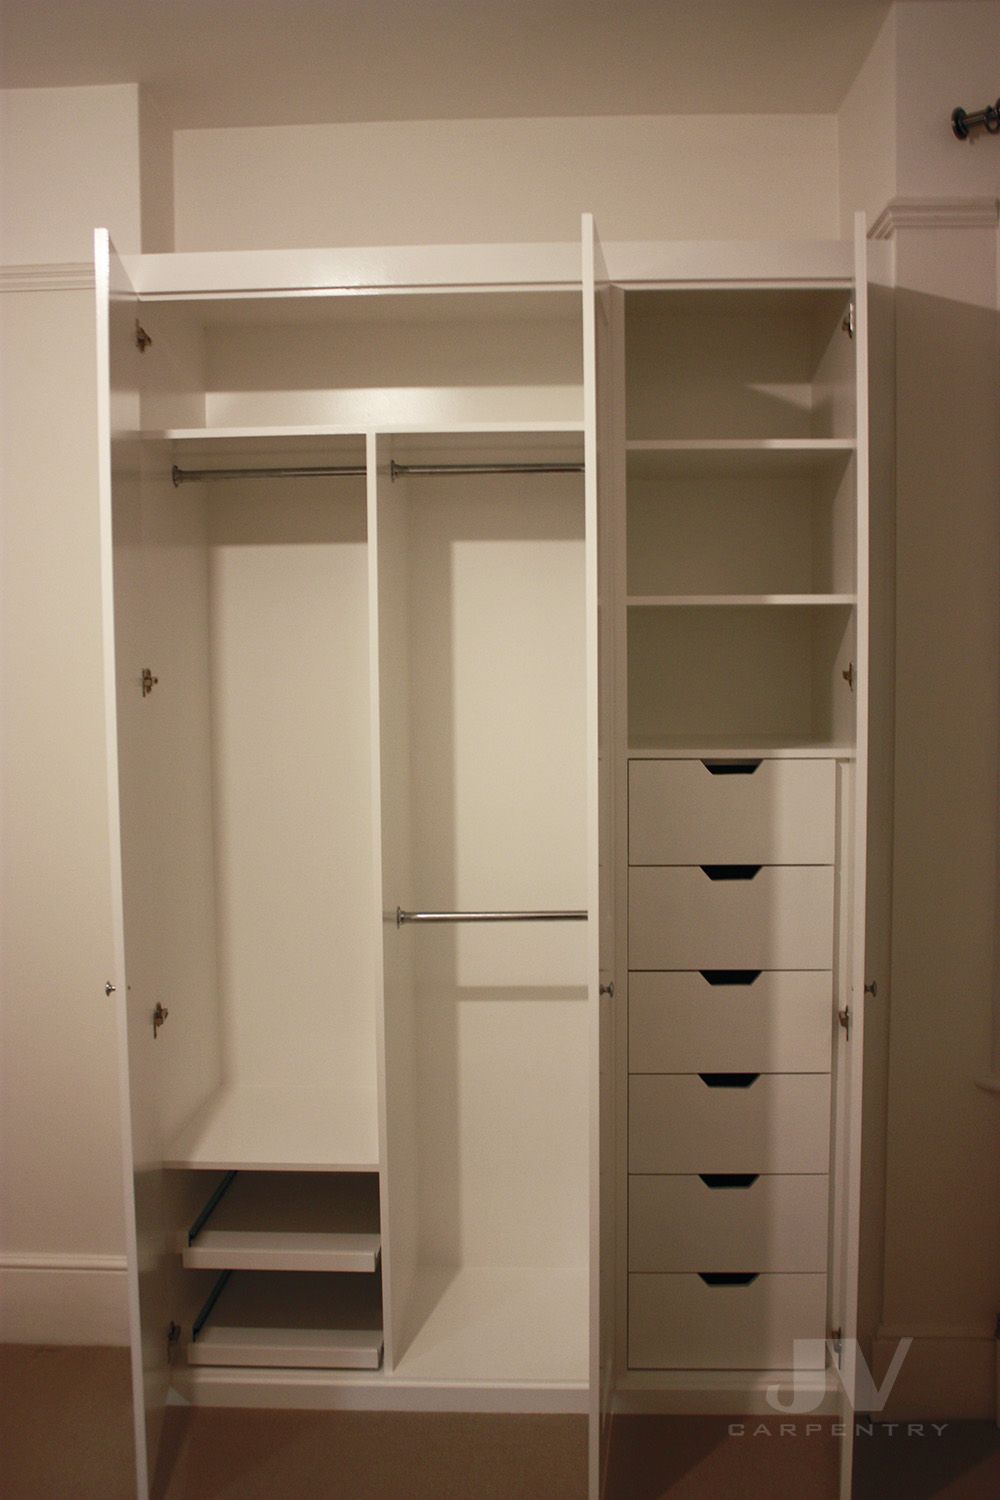 Wardrobe With Drawers: Maximizing Storage and Functionality in Your Closet